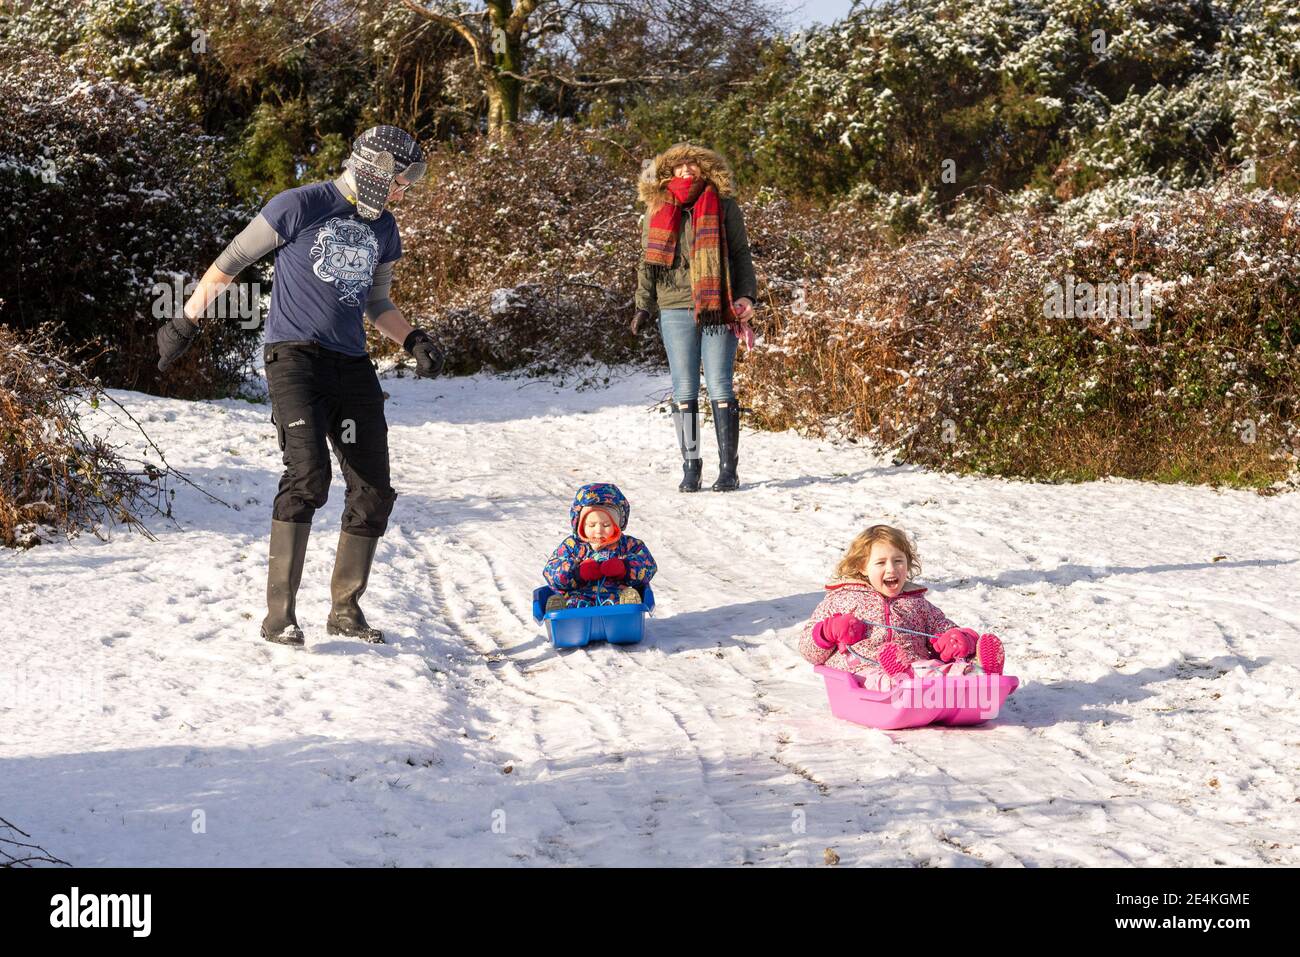 Godshill, Fordingbridge, New Forest, Hampshire, UK, Sunday 24th January, 2021, Weather: Early morning snow creates a winter wonderland in the New Forest national park. Family sledging in the perfect conditions Credit: Paul Biggins/Alamy Live News Stock Photo